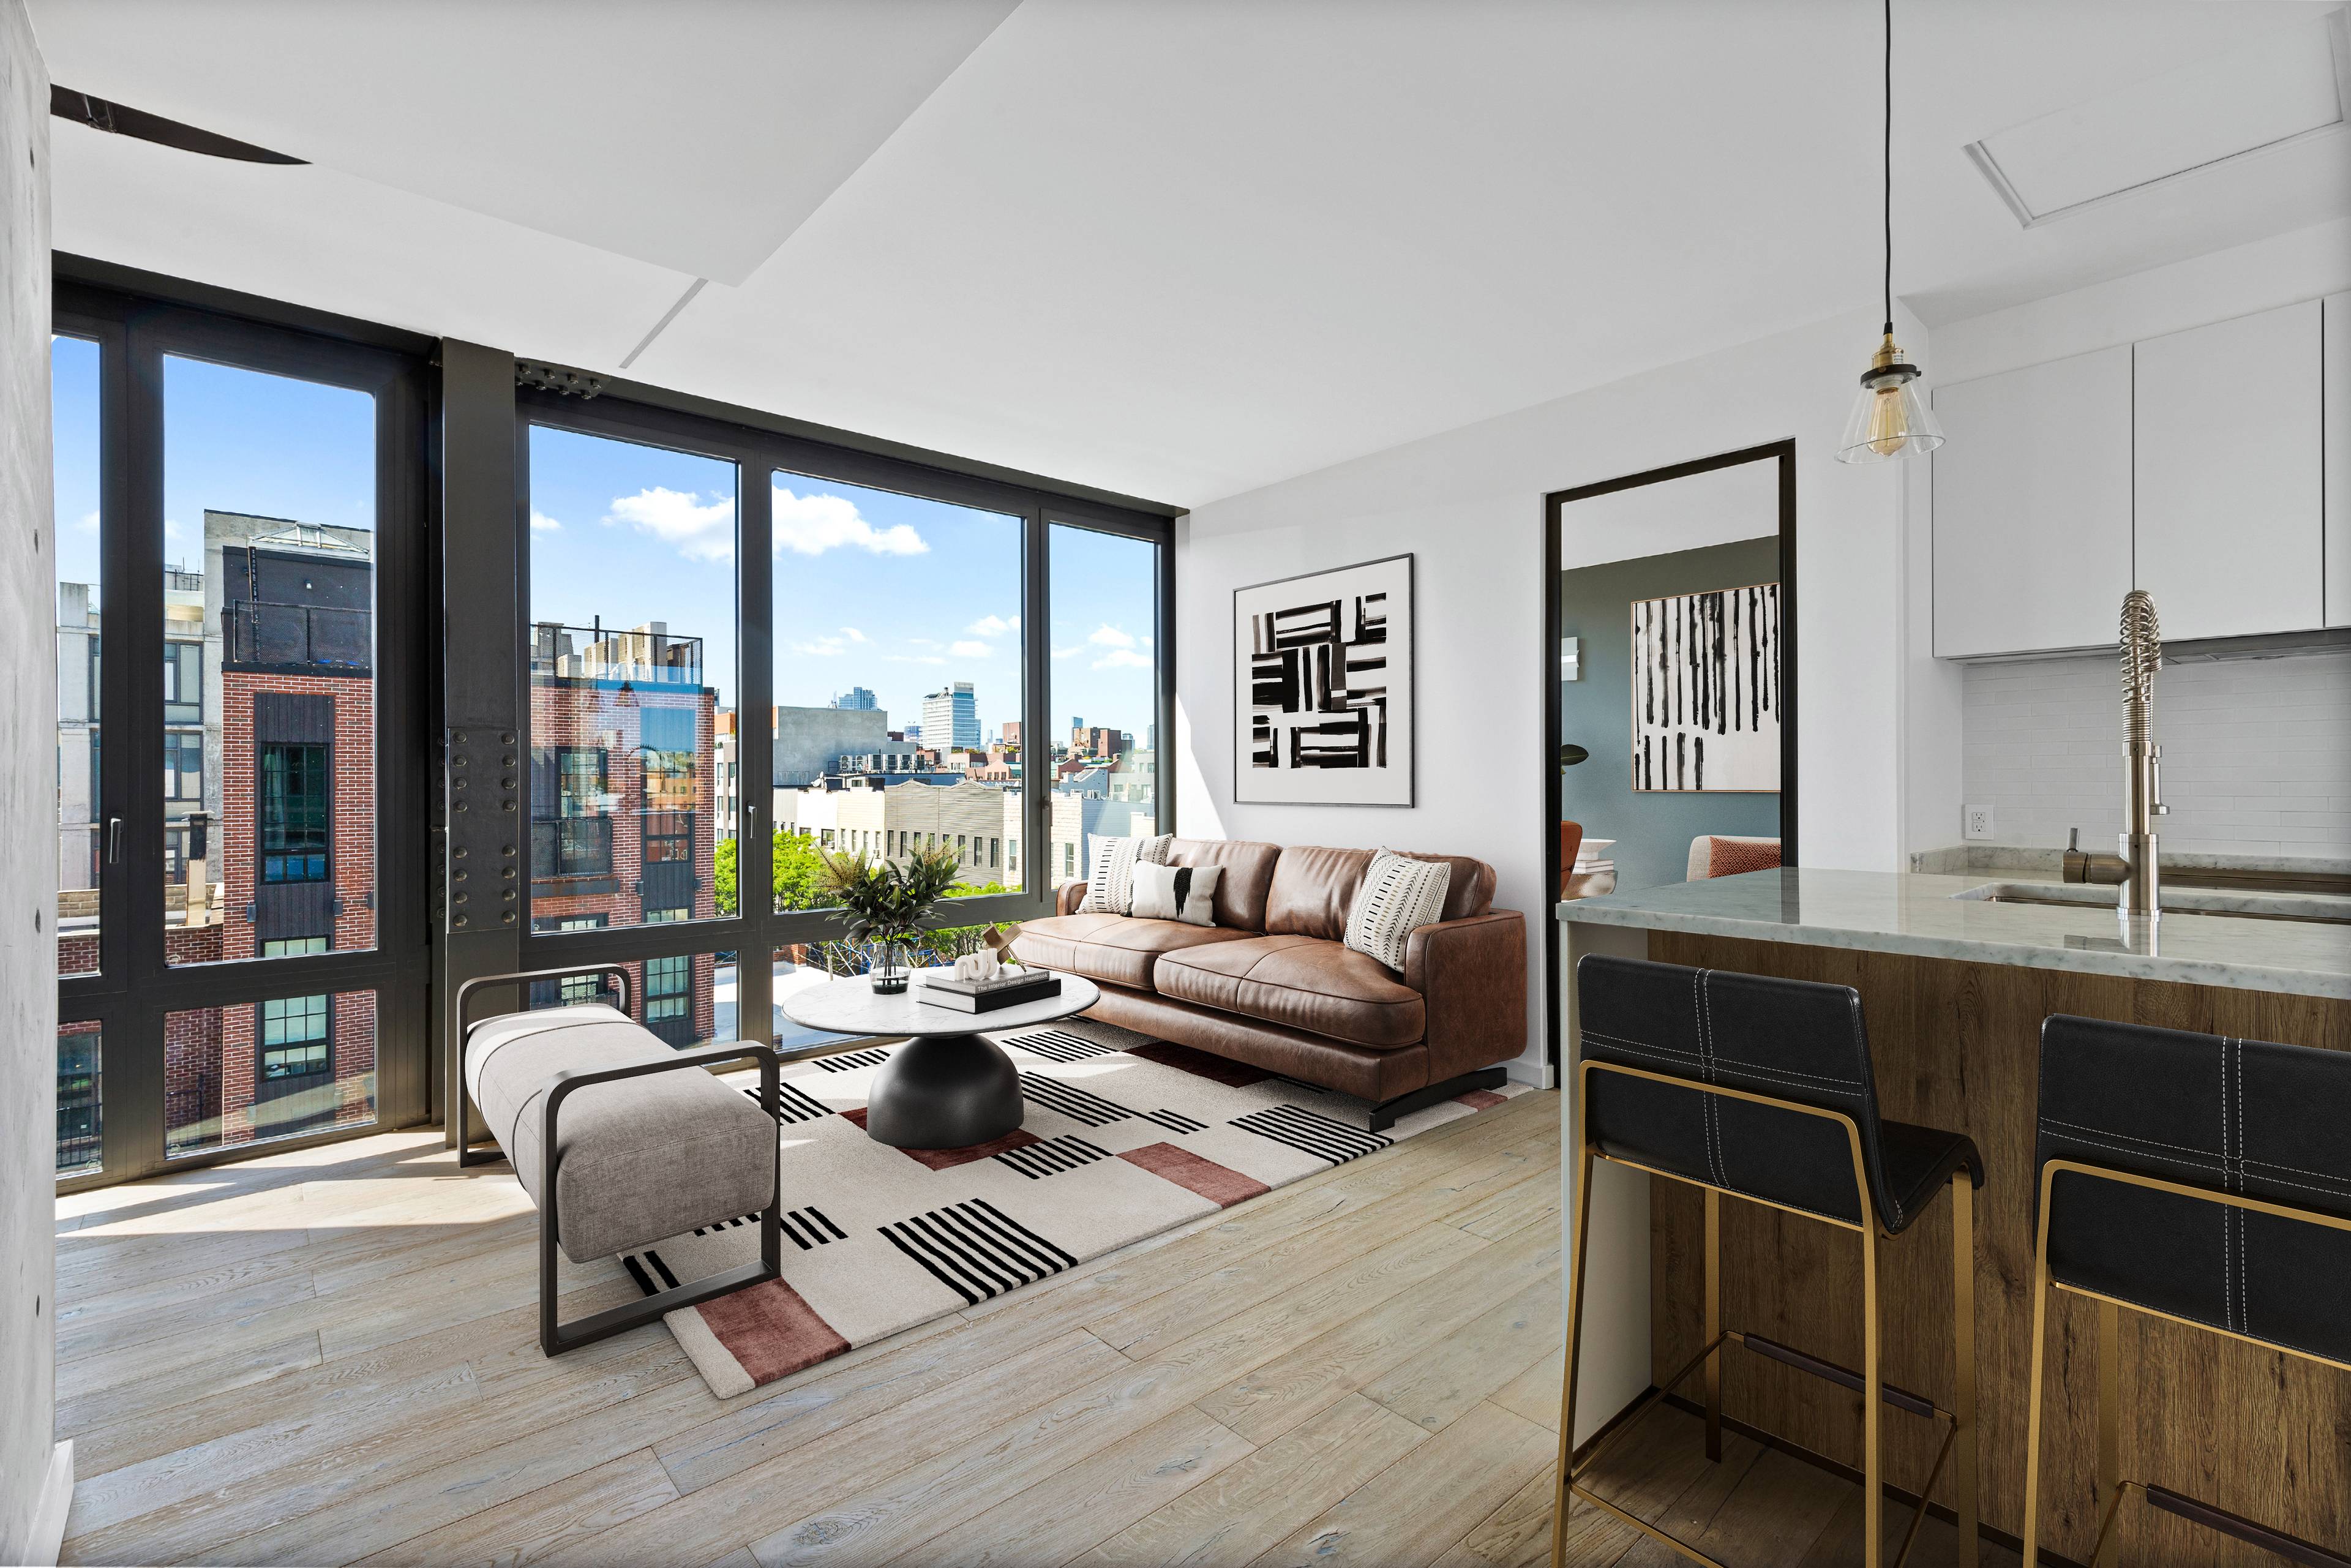 BRAND NEW LUXURY CONDOS IN THE HEART OF NORTH WILLIAMSBURG | 29 HAVEMEYER